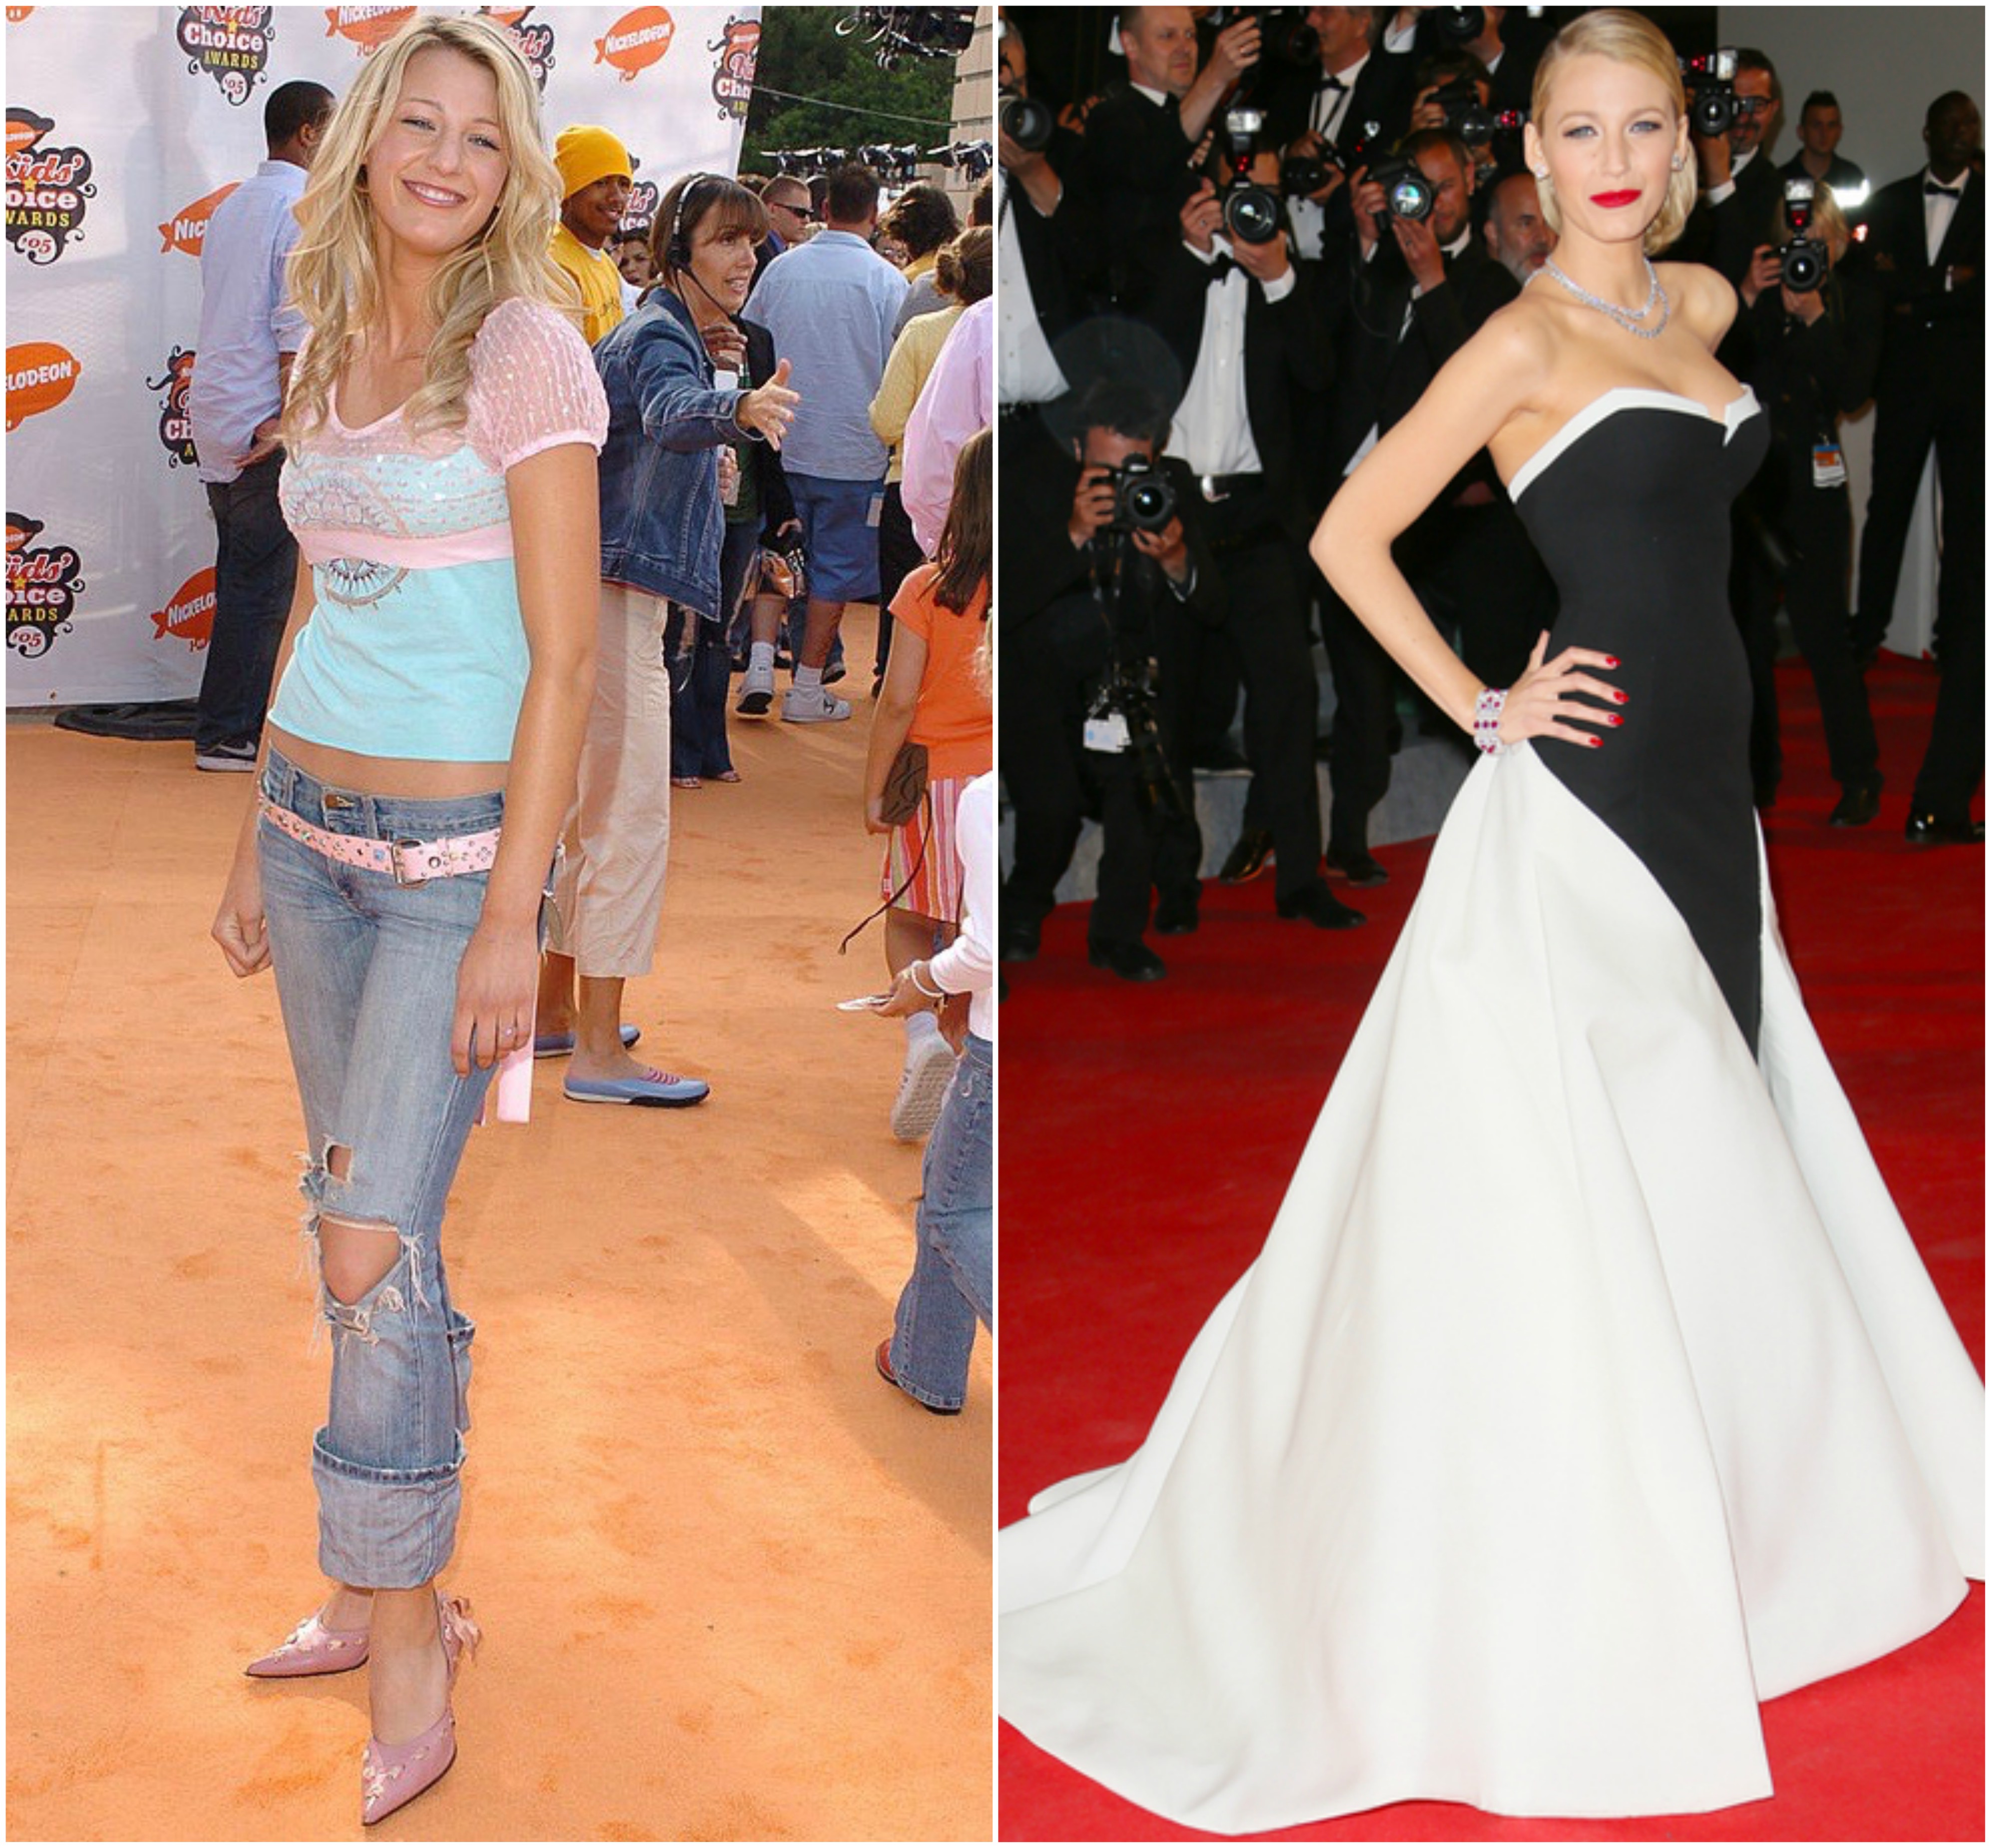 Blake_Lively_then&now.jpg (1.49 MB)